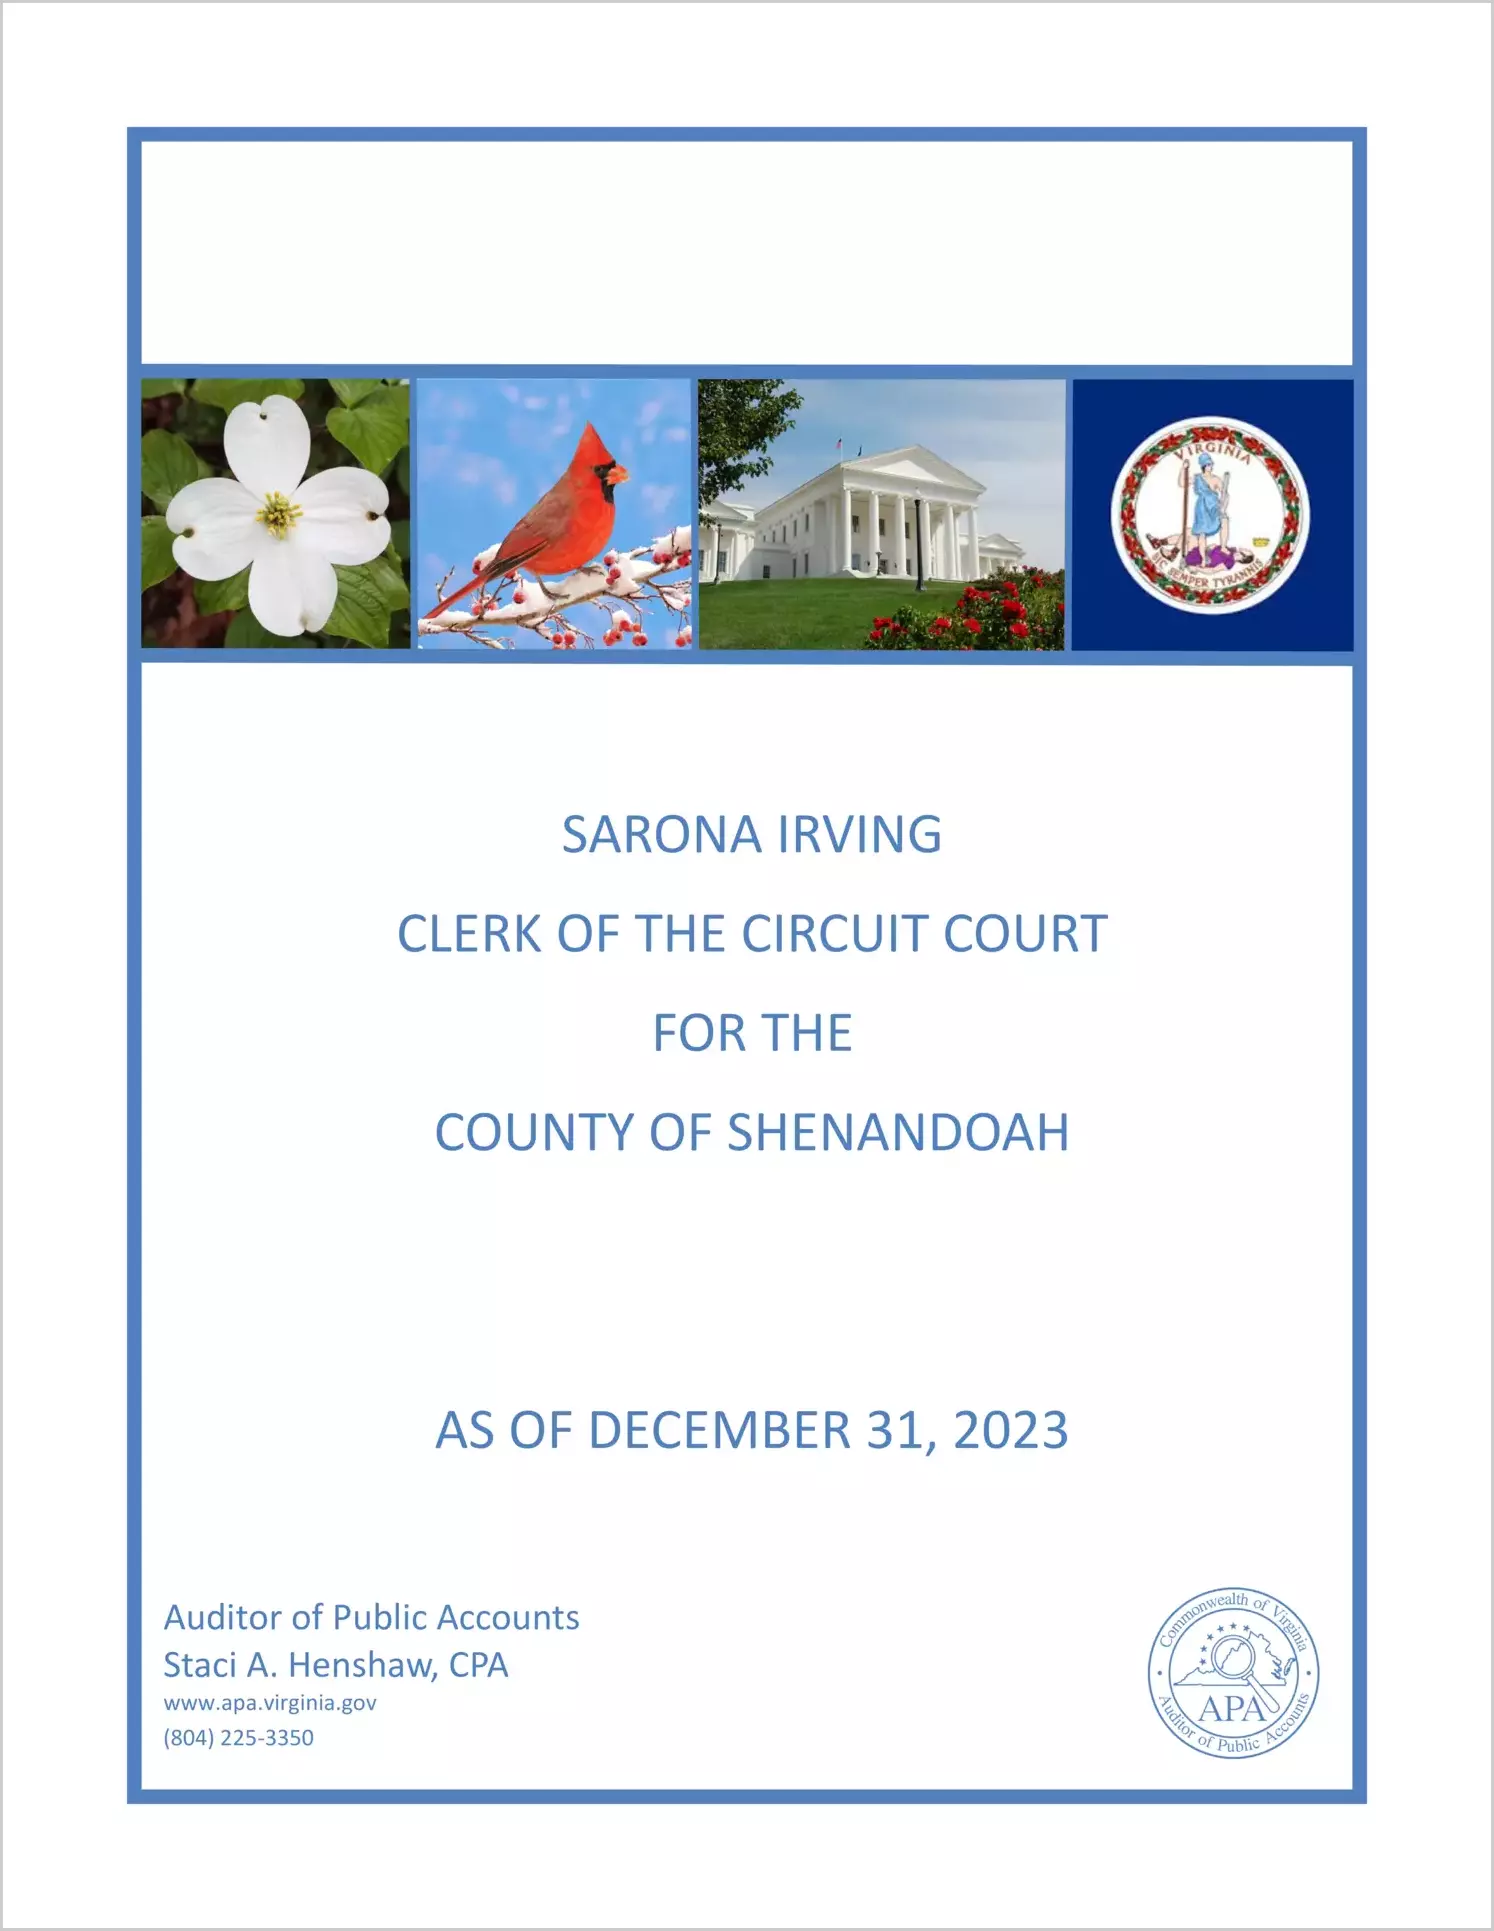 Clerk of the Circuit Court (Turnover) for the County of Shenandoah as of December 31, 2023